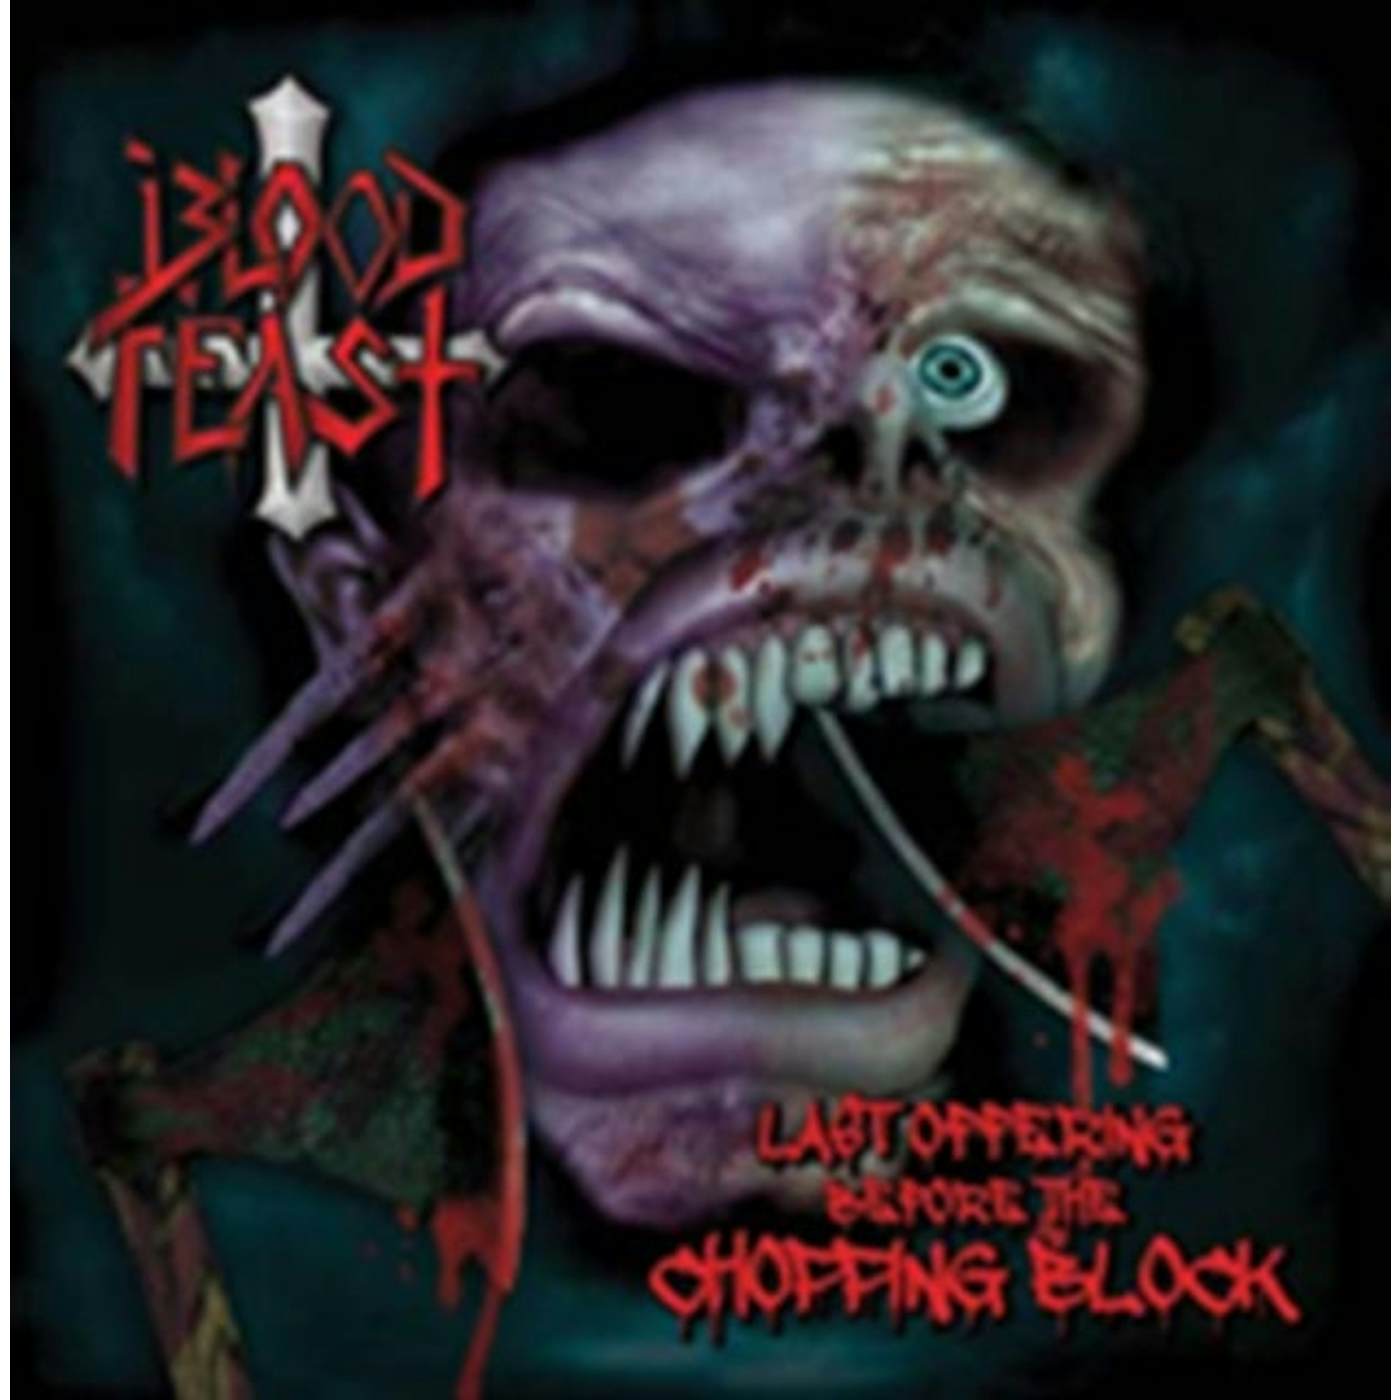 Blood Feast CD - Last Offering Before The Chopping Block